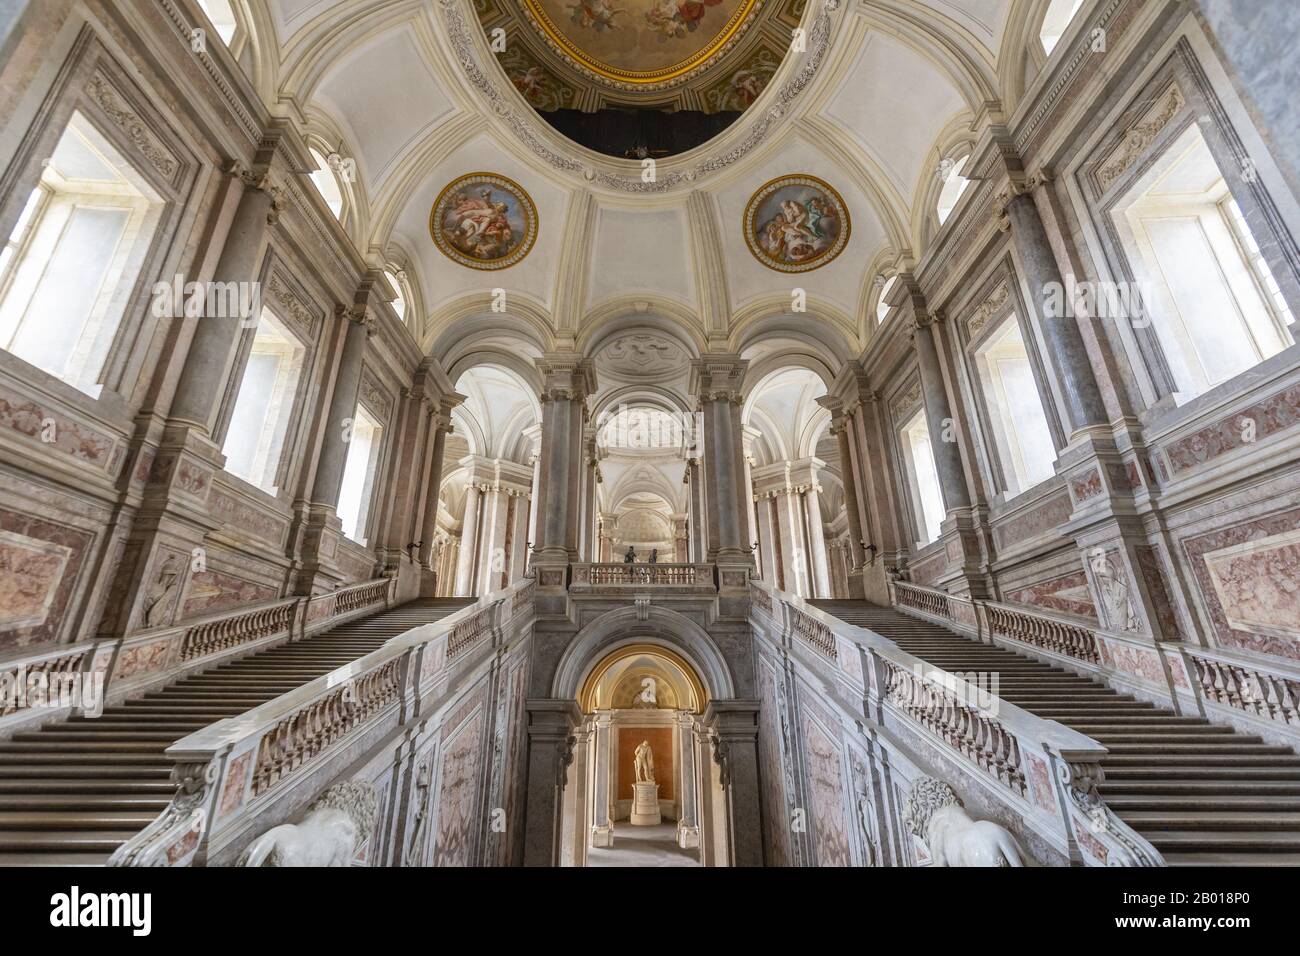 Caserta Royal Palace Entrance hall and stairs of the royal apartments, Caserta, Campania, Italy. Stock Photo